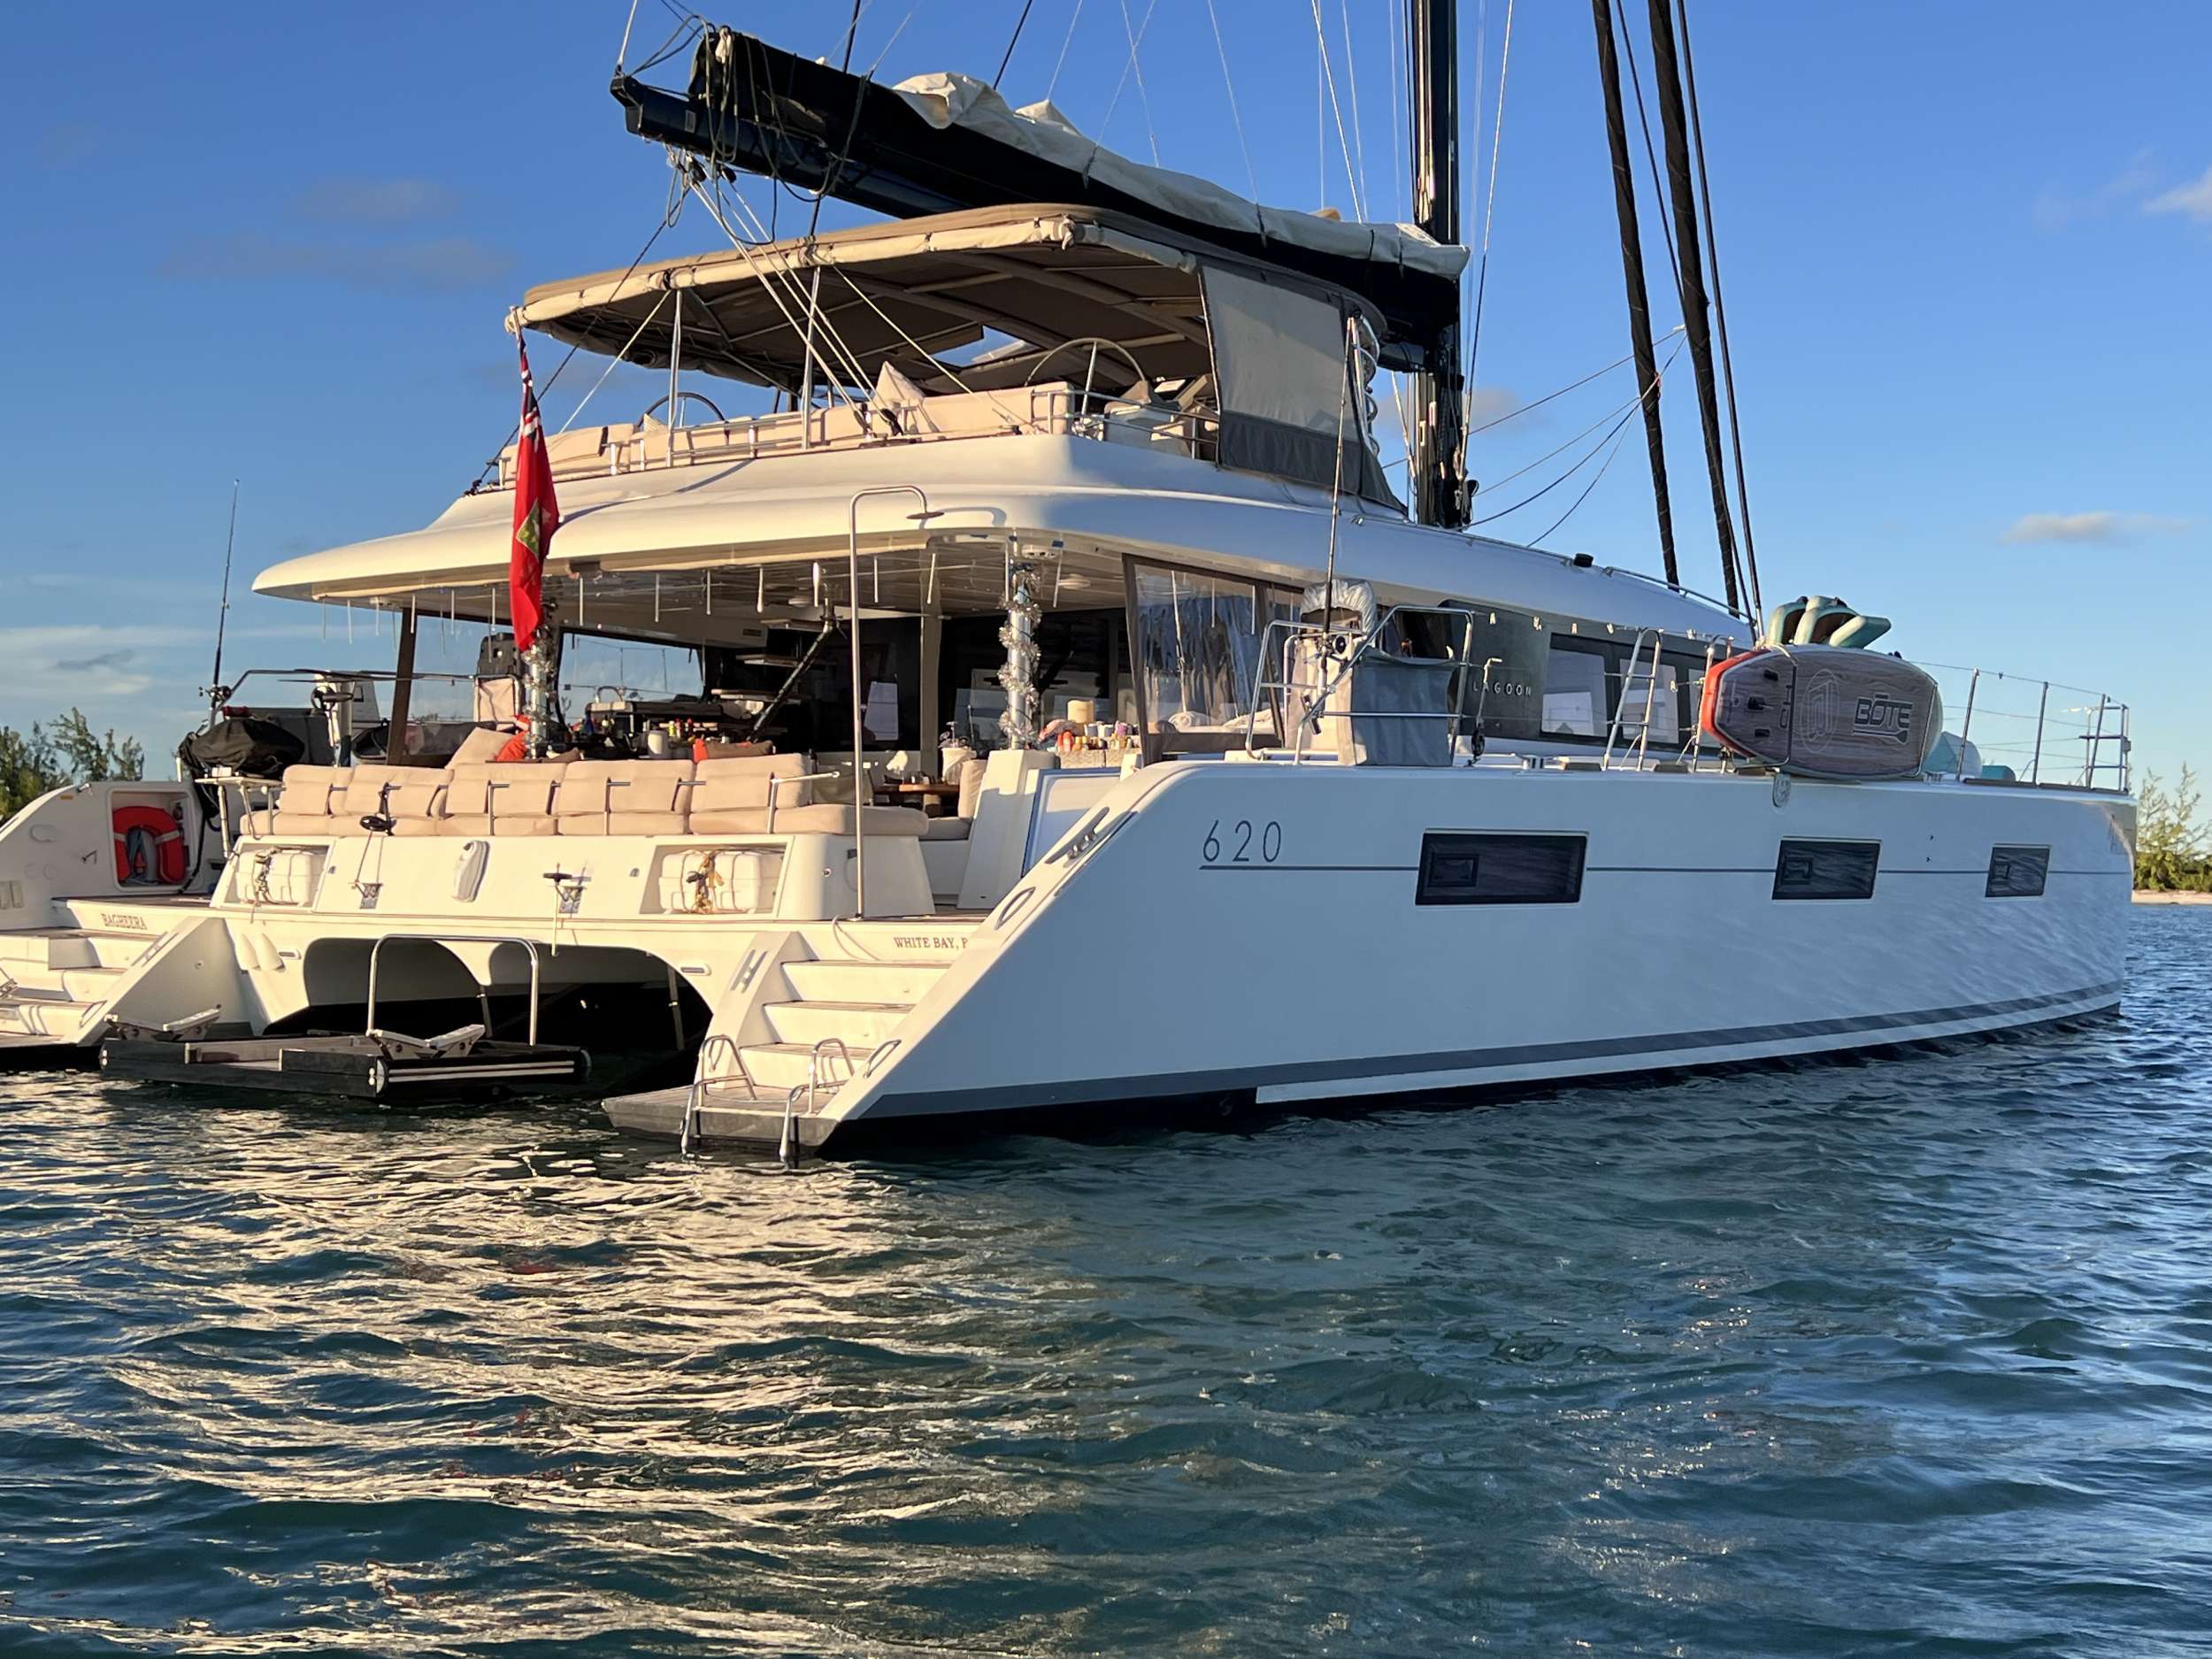 BAGHEERA - NEW 2018 L620
Avalon's owner upgraded her yacht and we are very pleased to introduce Bagheera, the new version of the Lagoon 620.  The crew, Alex and Carla are excited to continue offering the exemplary service for which they are renowned.  Bagheera has a full Bimini on flybridge with full wrap around enclosure.